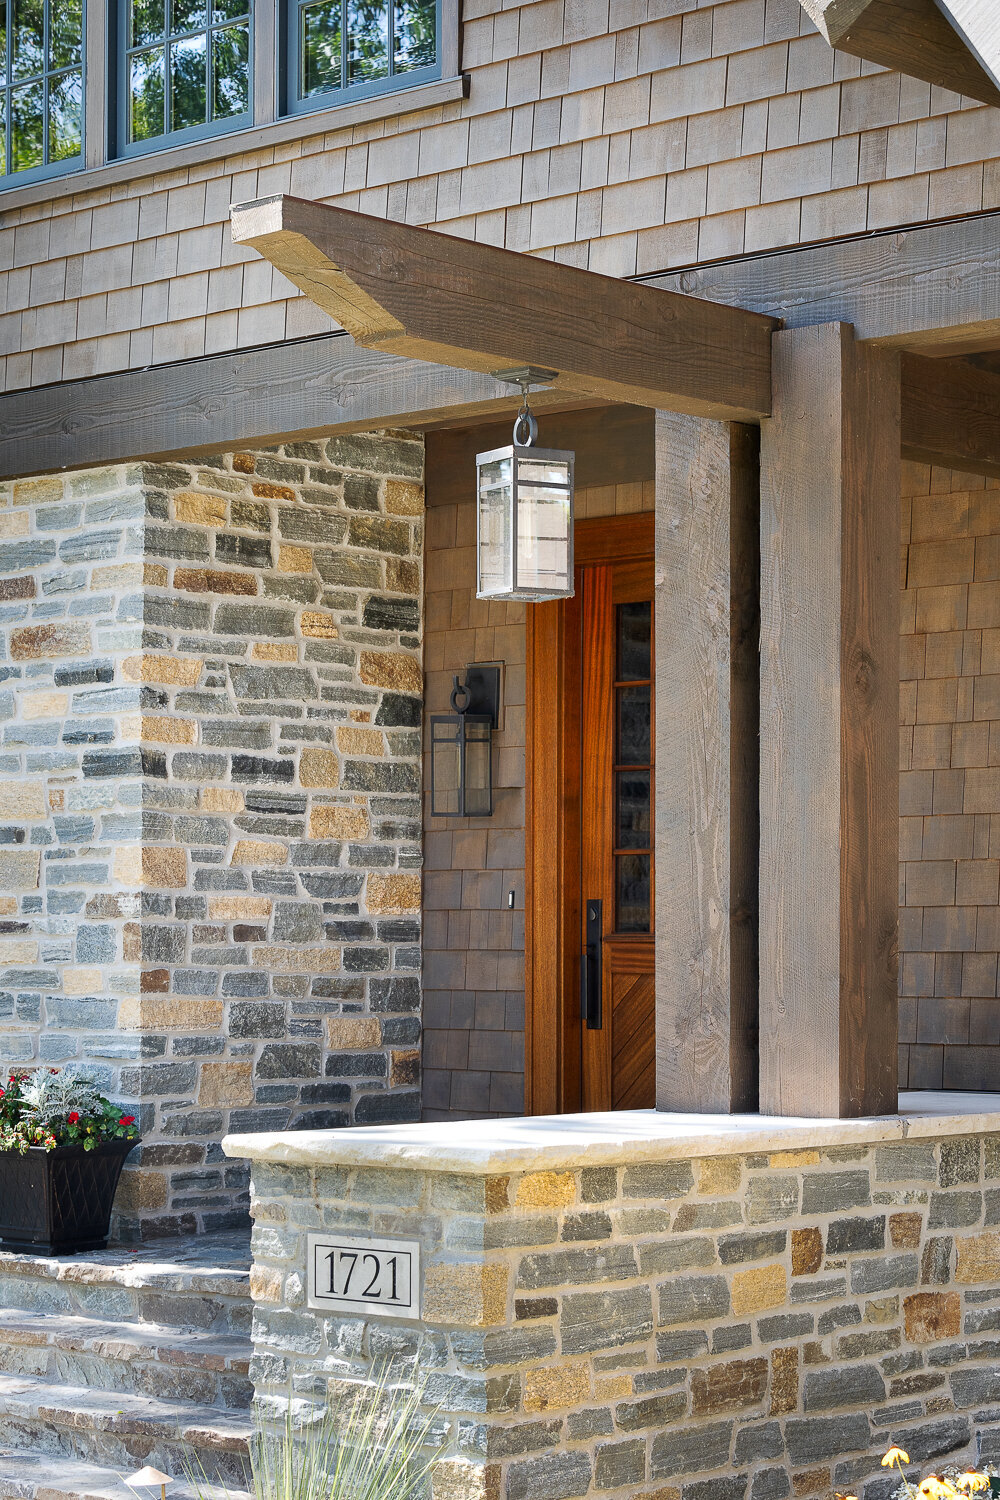 Architecturally designed front porch made of stone